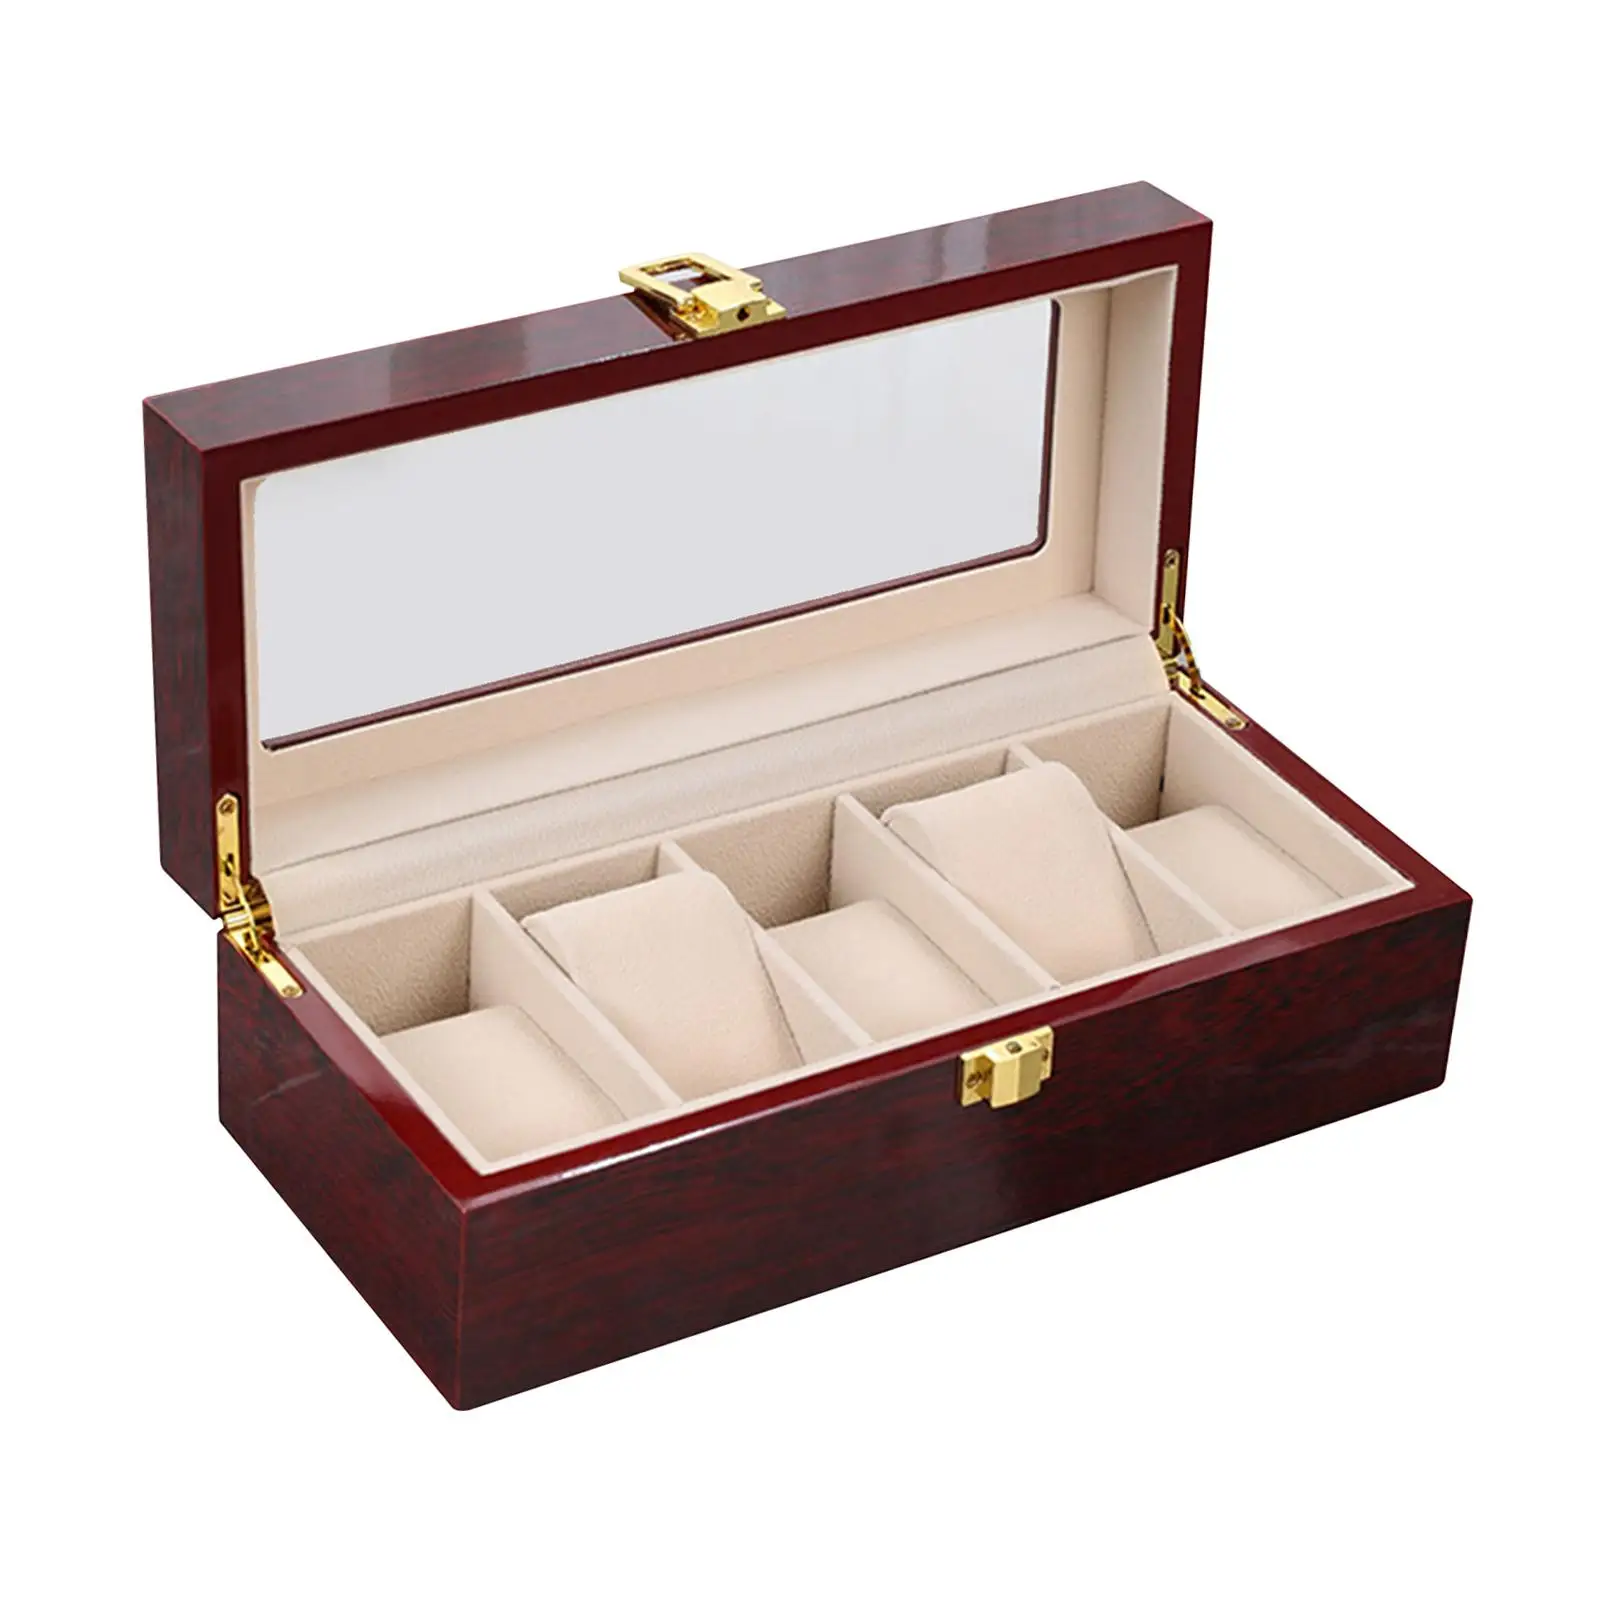 Watch Storage Box Portable Wooden Watch Box for Girls Women Home Decoration Table Dresser Shop Display Watches Jewelry Display